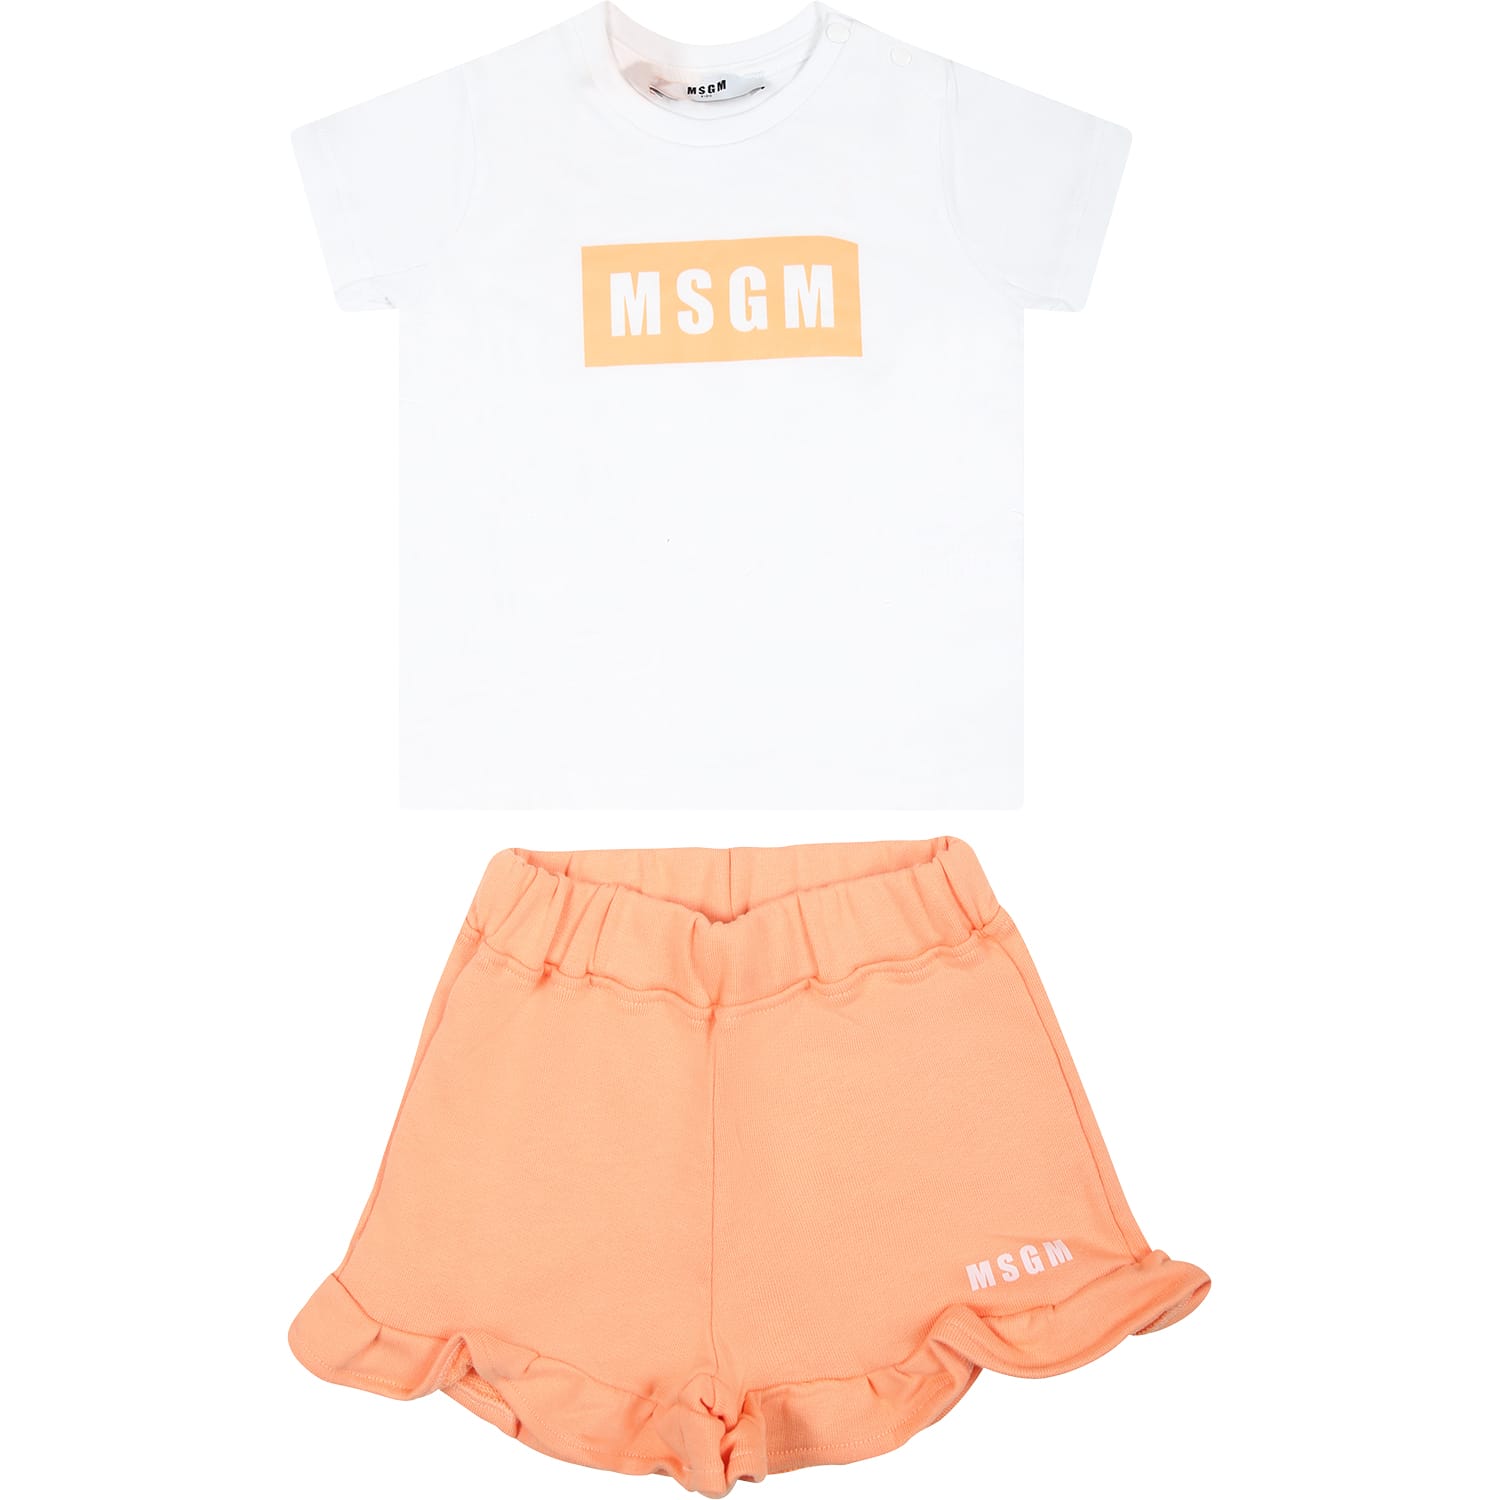 Msgm Orange Suit For Baby Girl With Logo